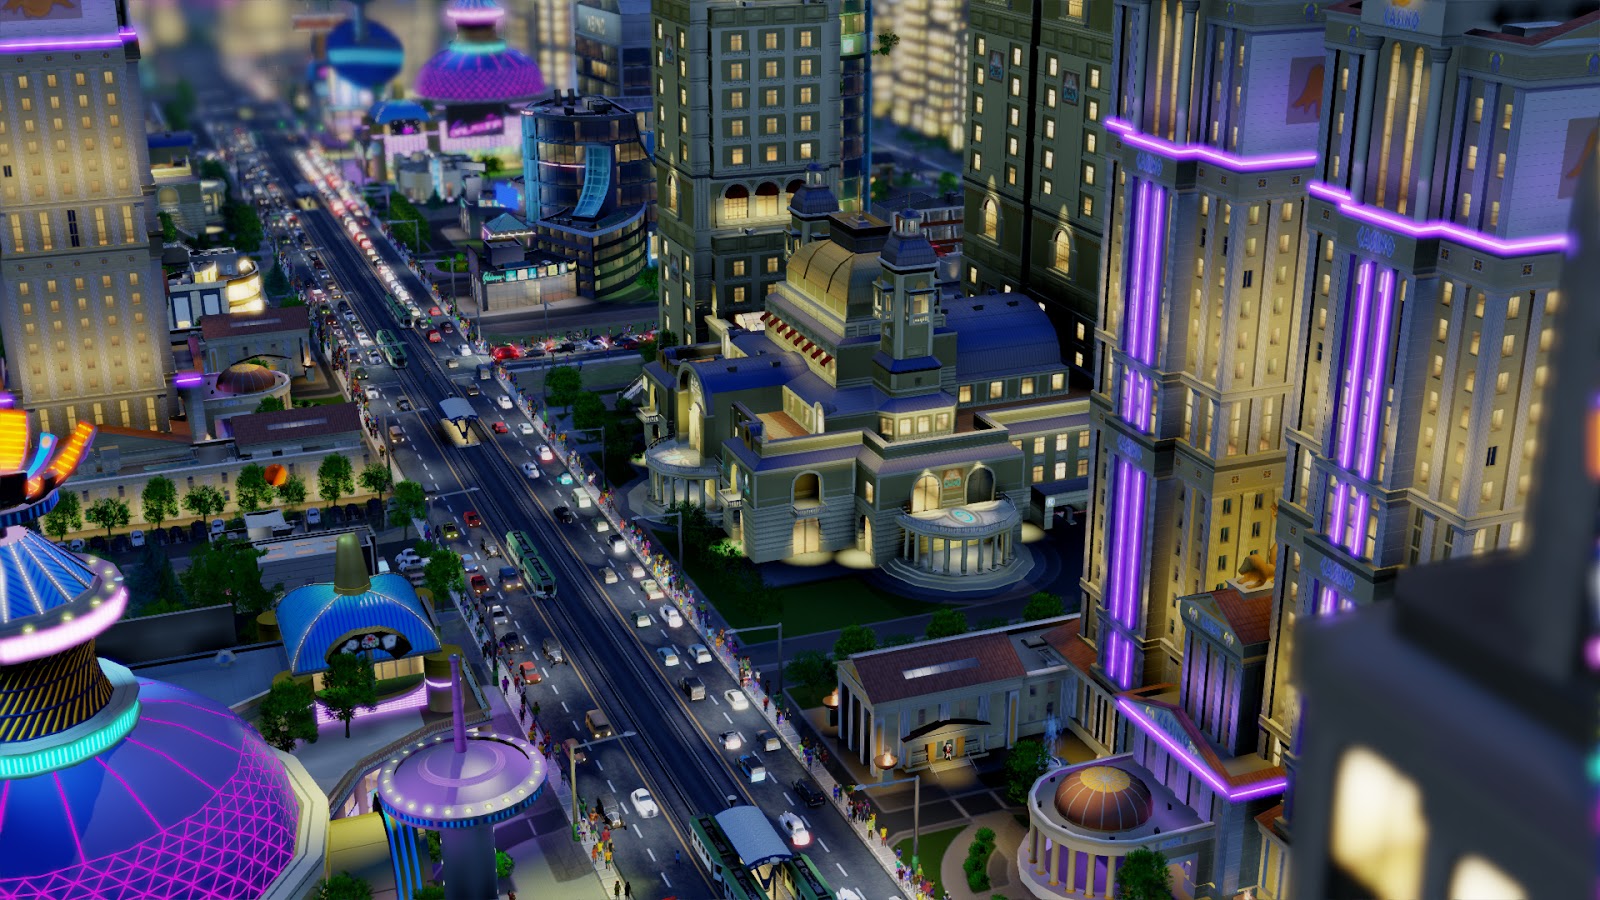 simcity pc game download